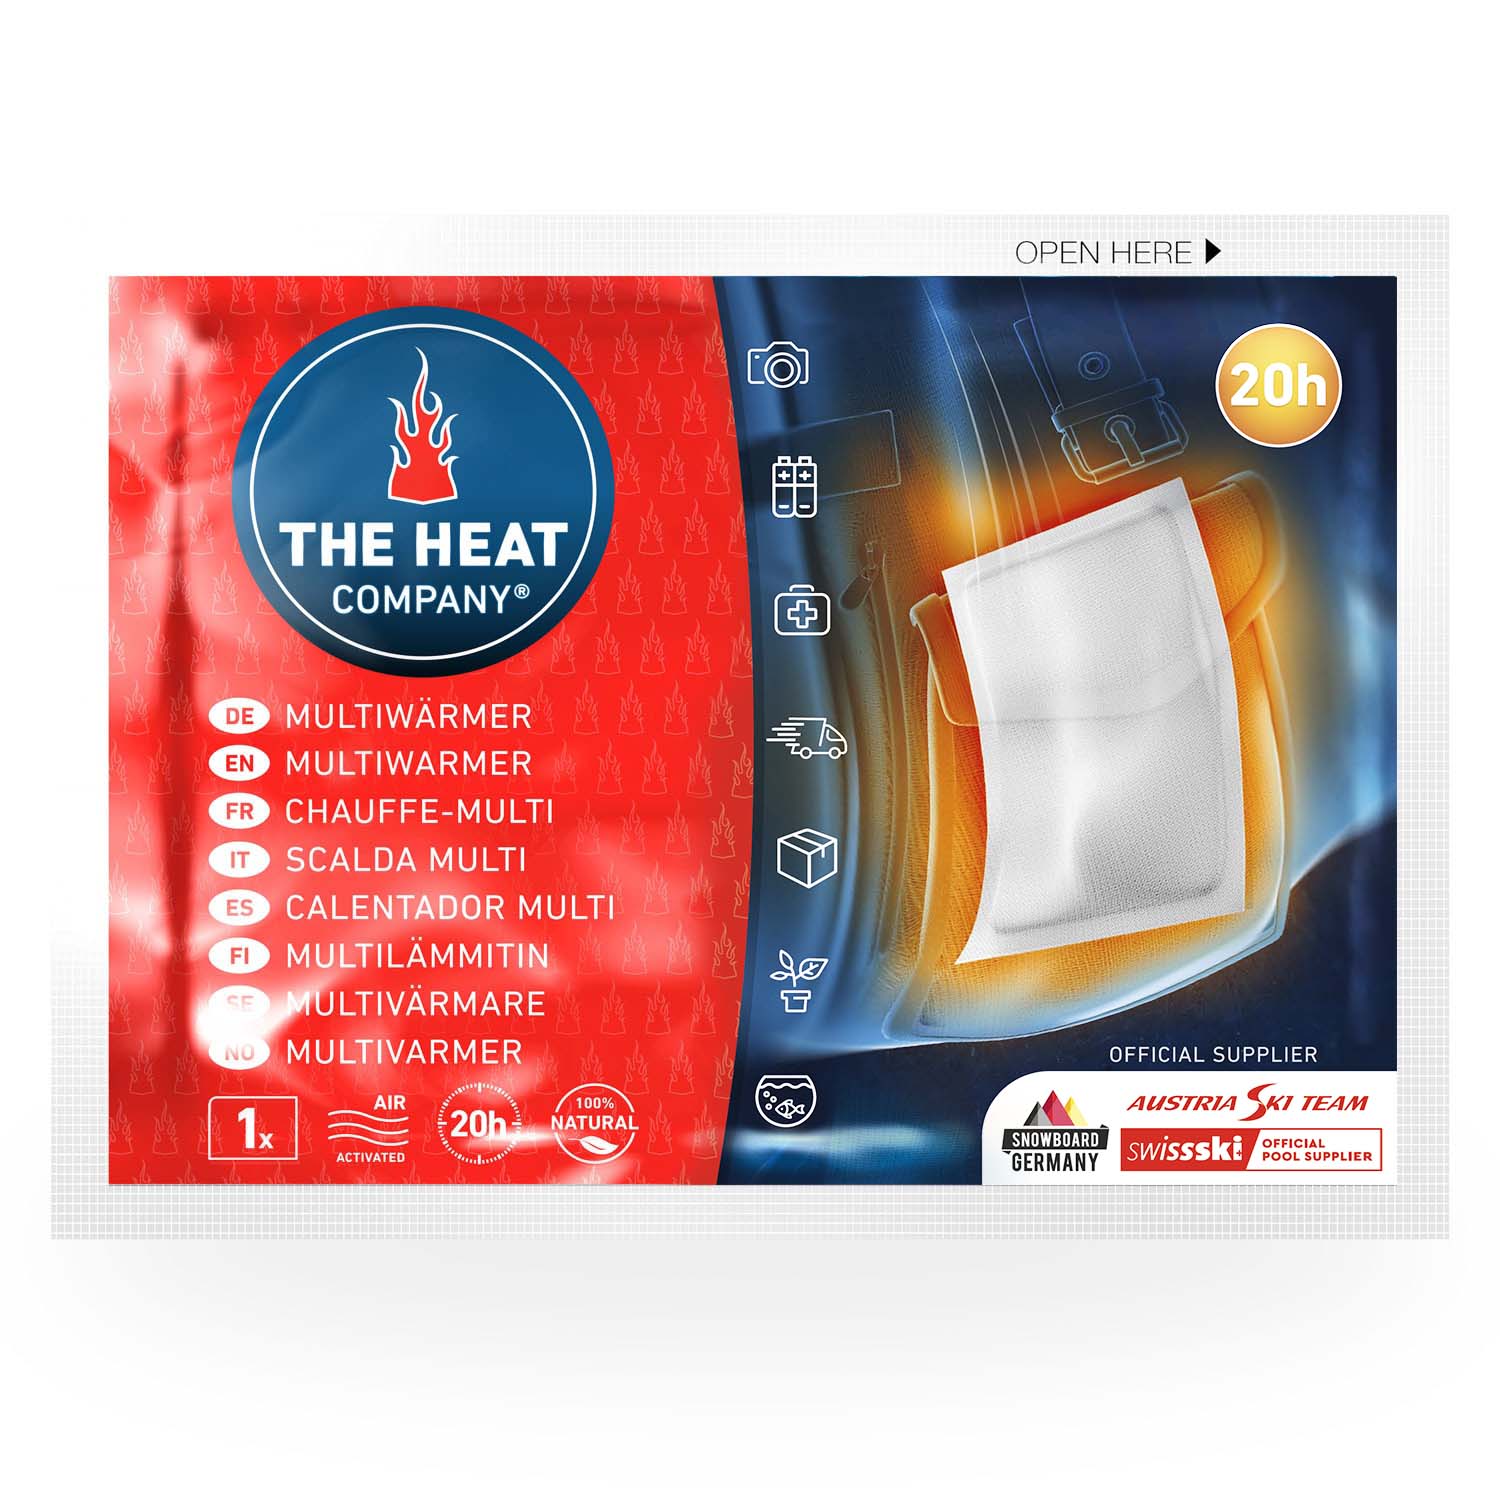 20+ hours of reliable | THE HEAT COMPANY®